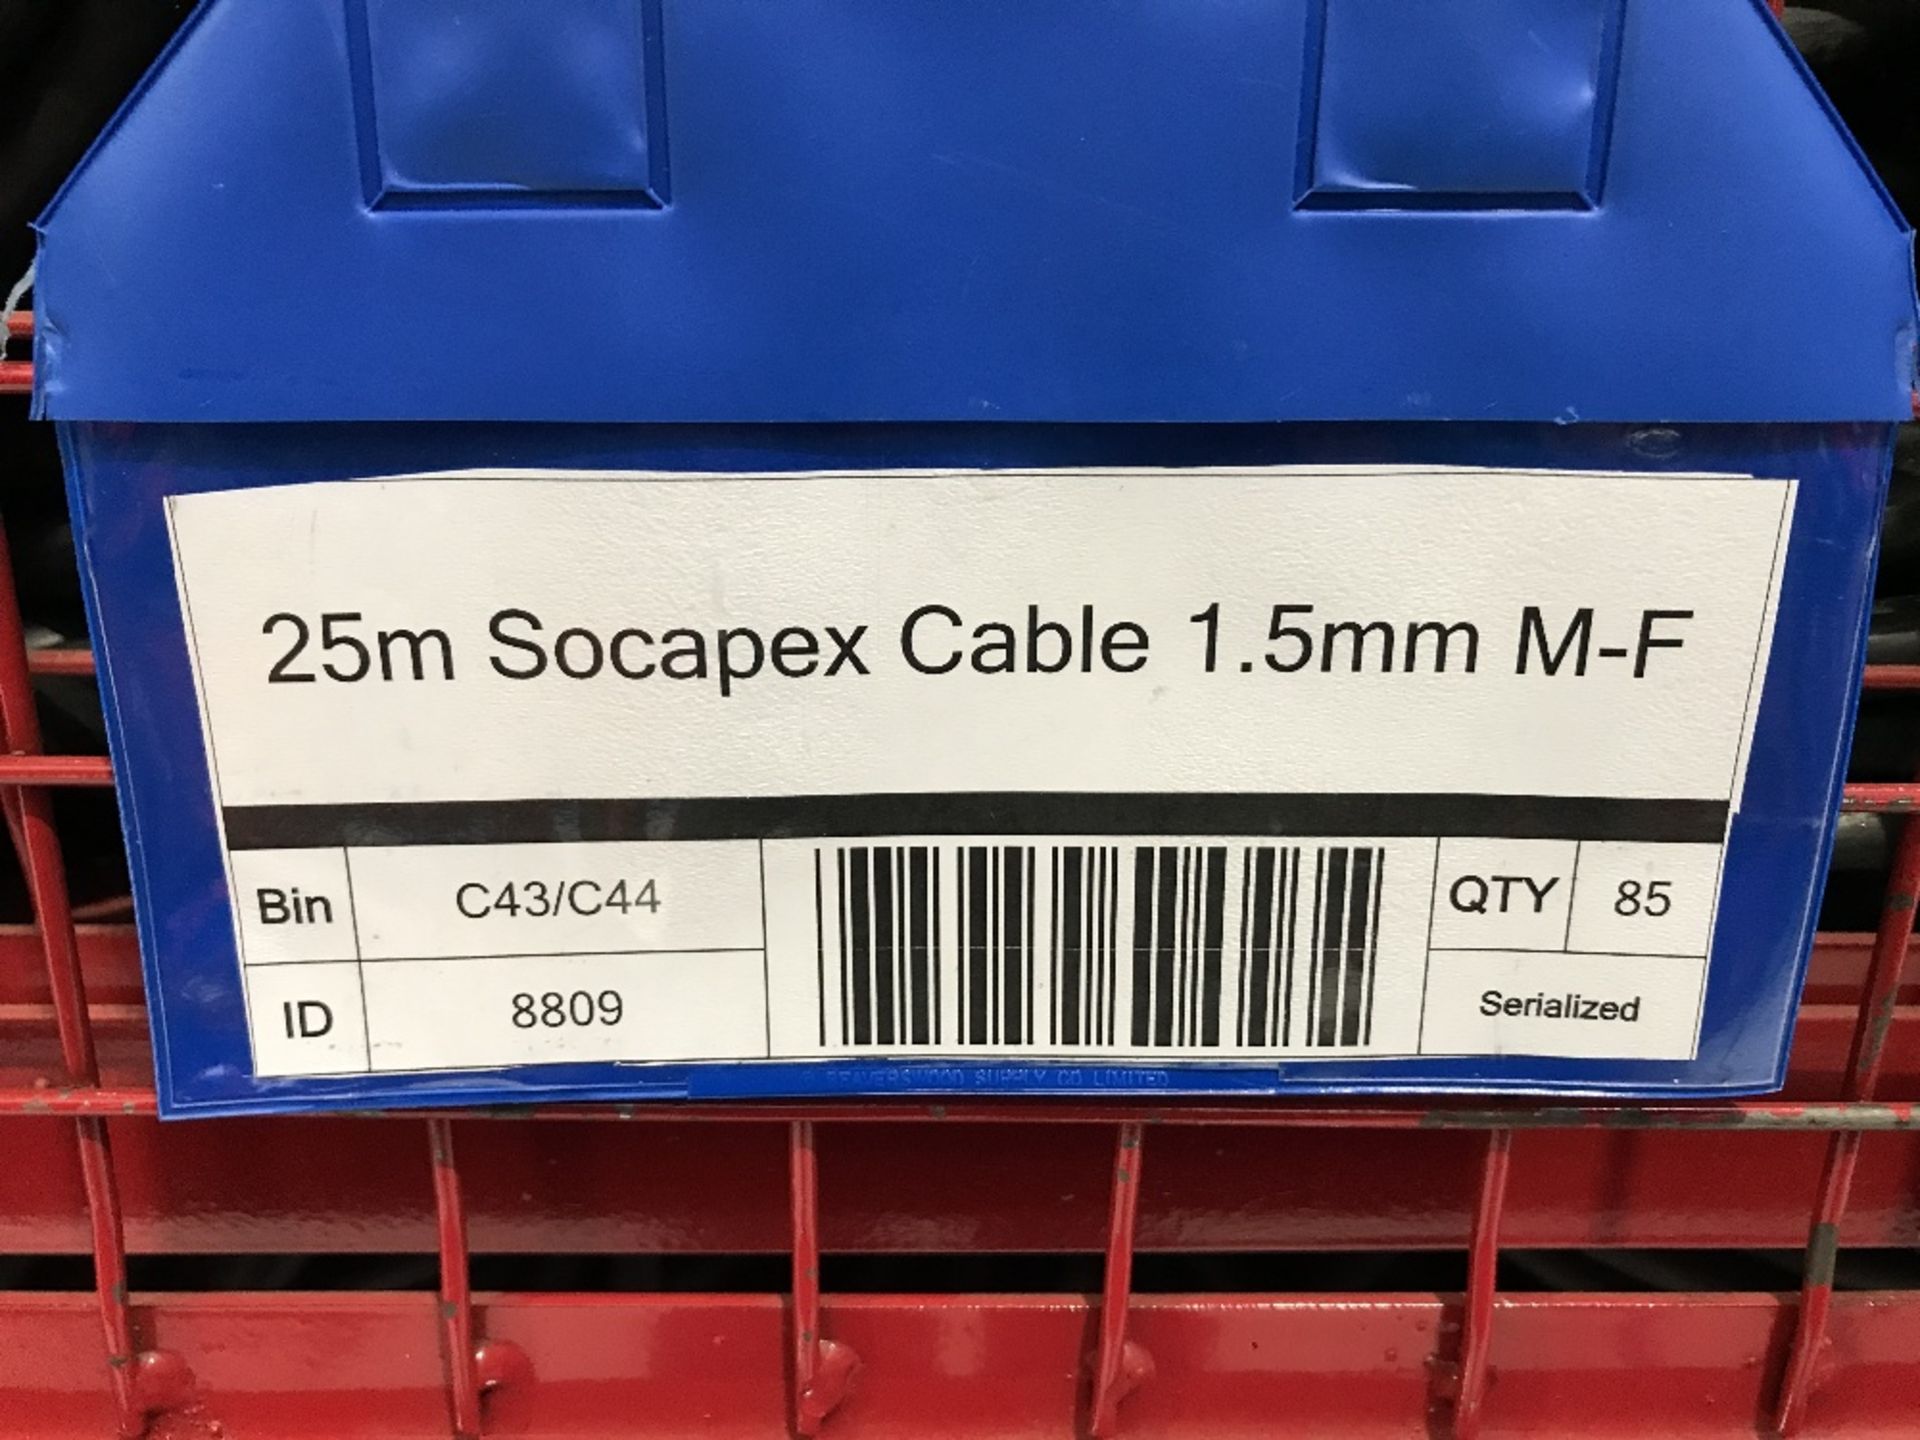 Large Quantity of 25m Socapex Cable 1.5mm M-F with Steel Fabricated Stillage - Image 2 of 2